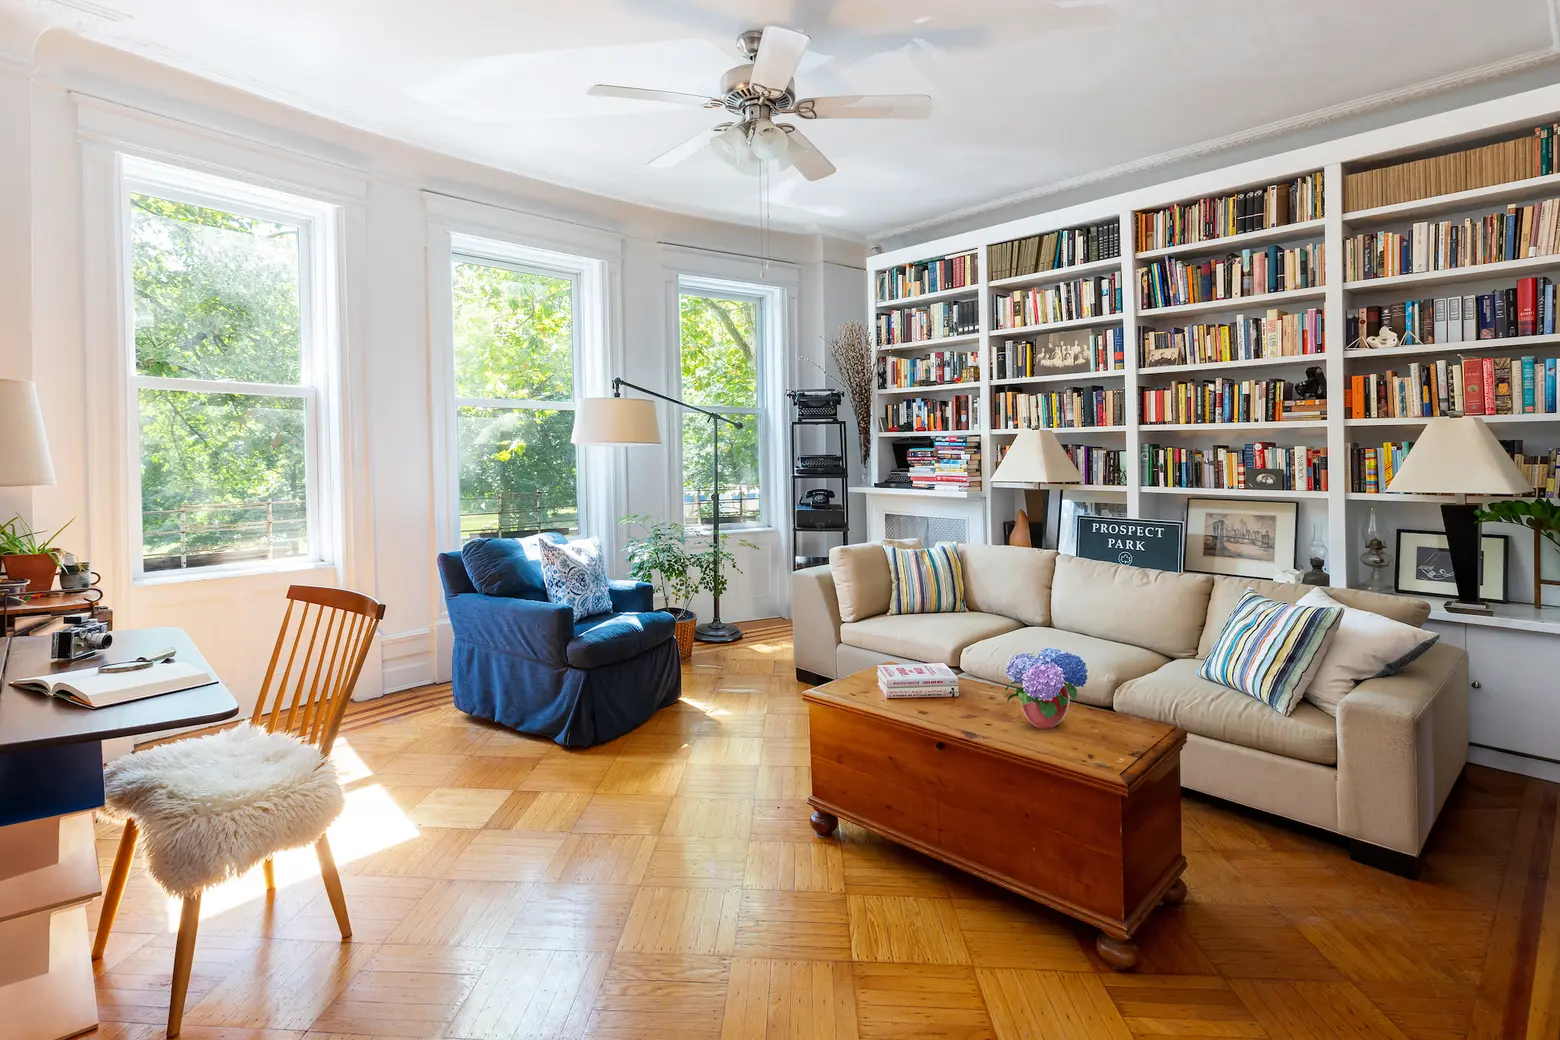 Prospect Park-facing co-op with pocket doors, built-ins, and bay windows lists for $1.95M